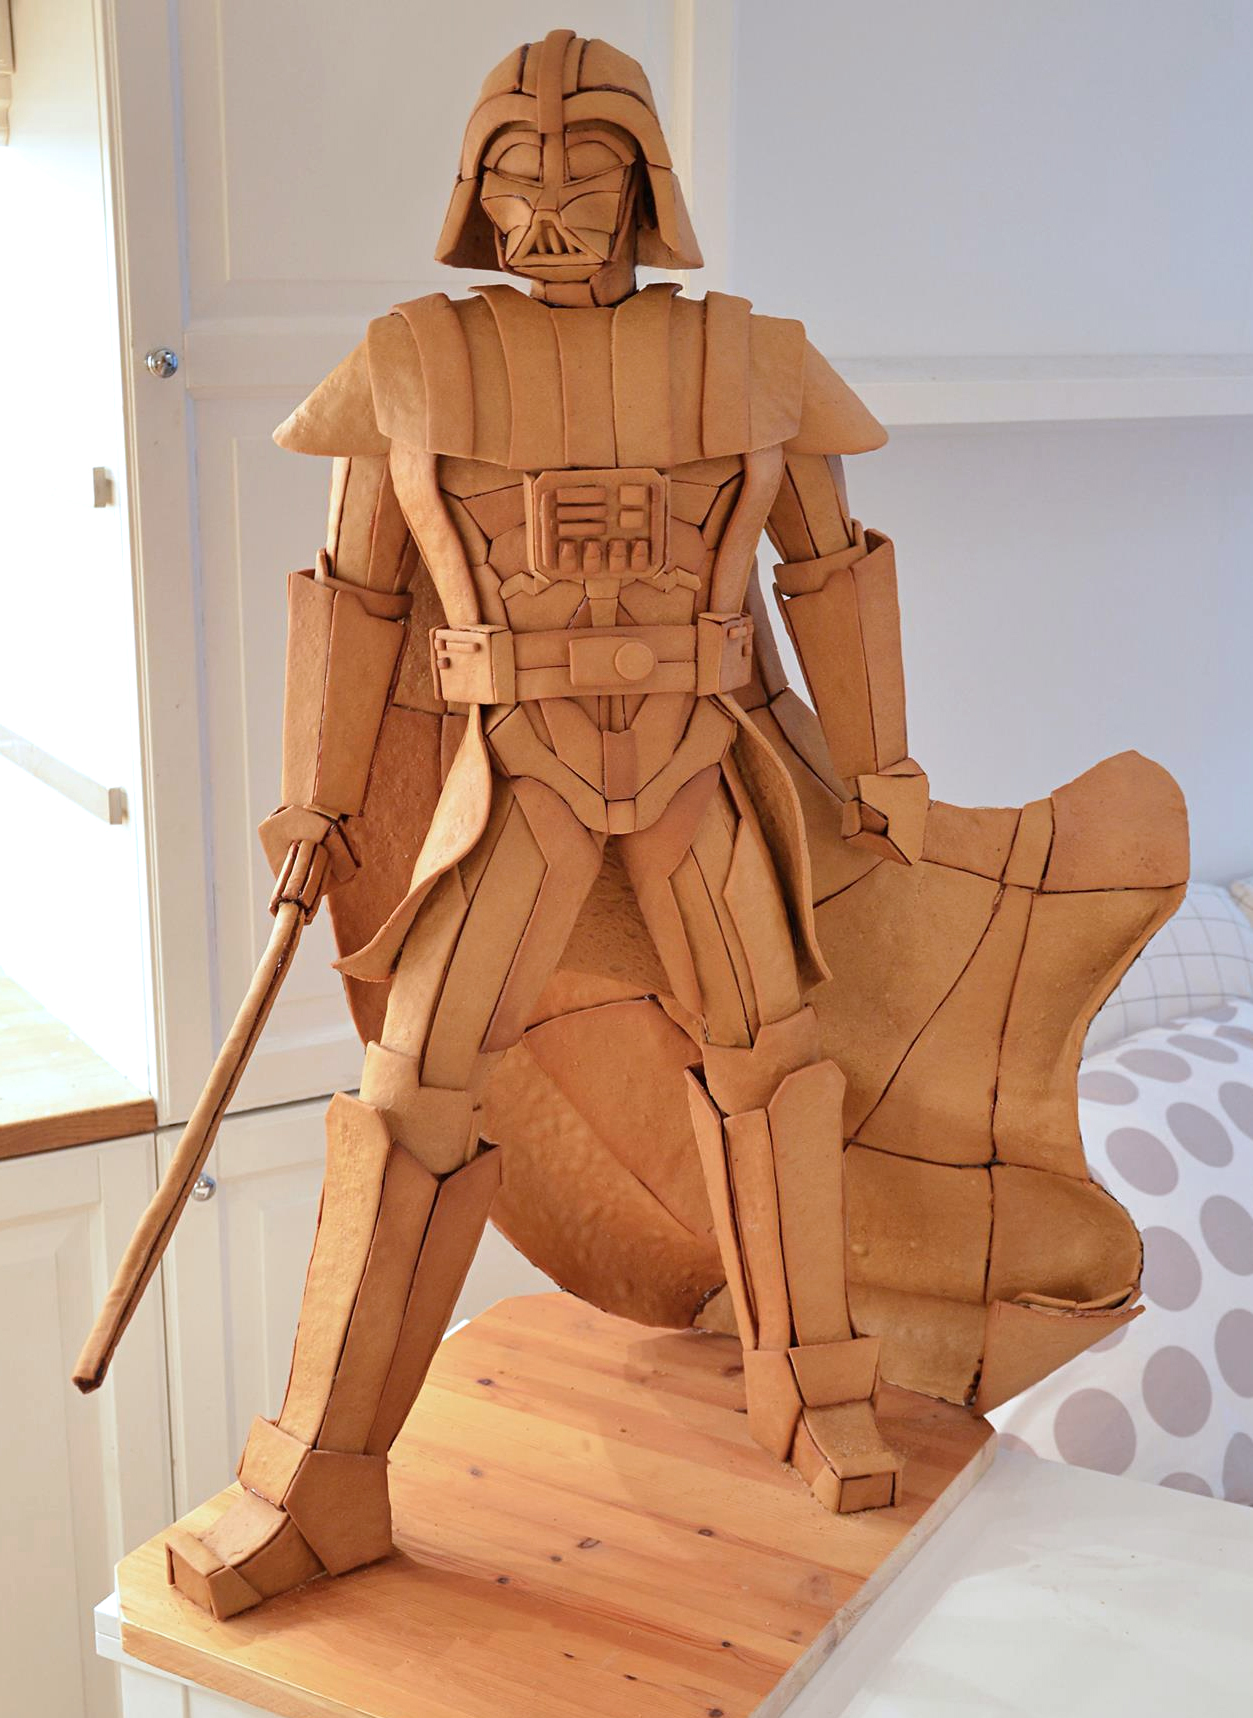 We Need To Make Room For This Gingerbread Darth Vader in The Smithsonian